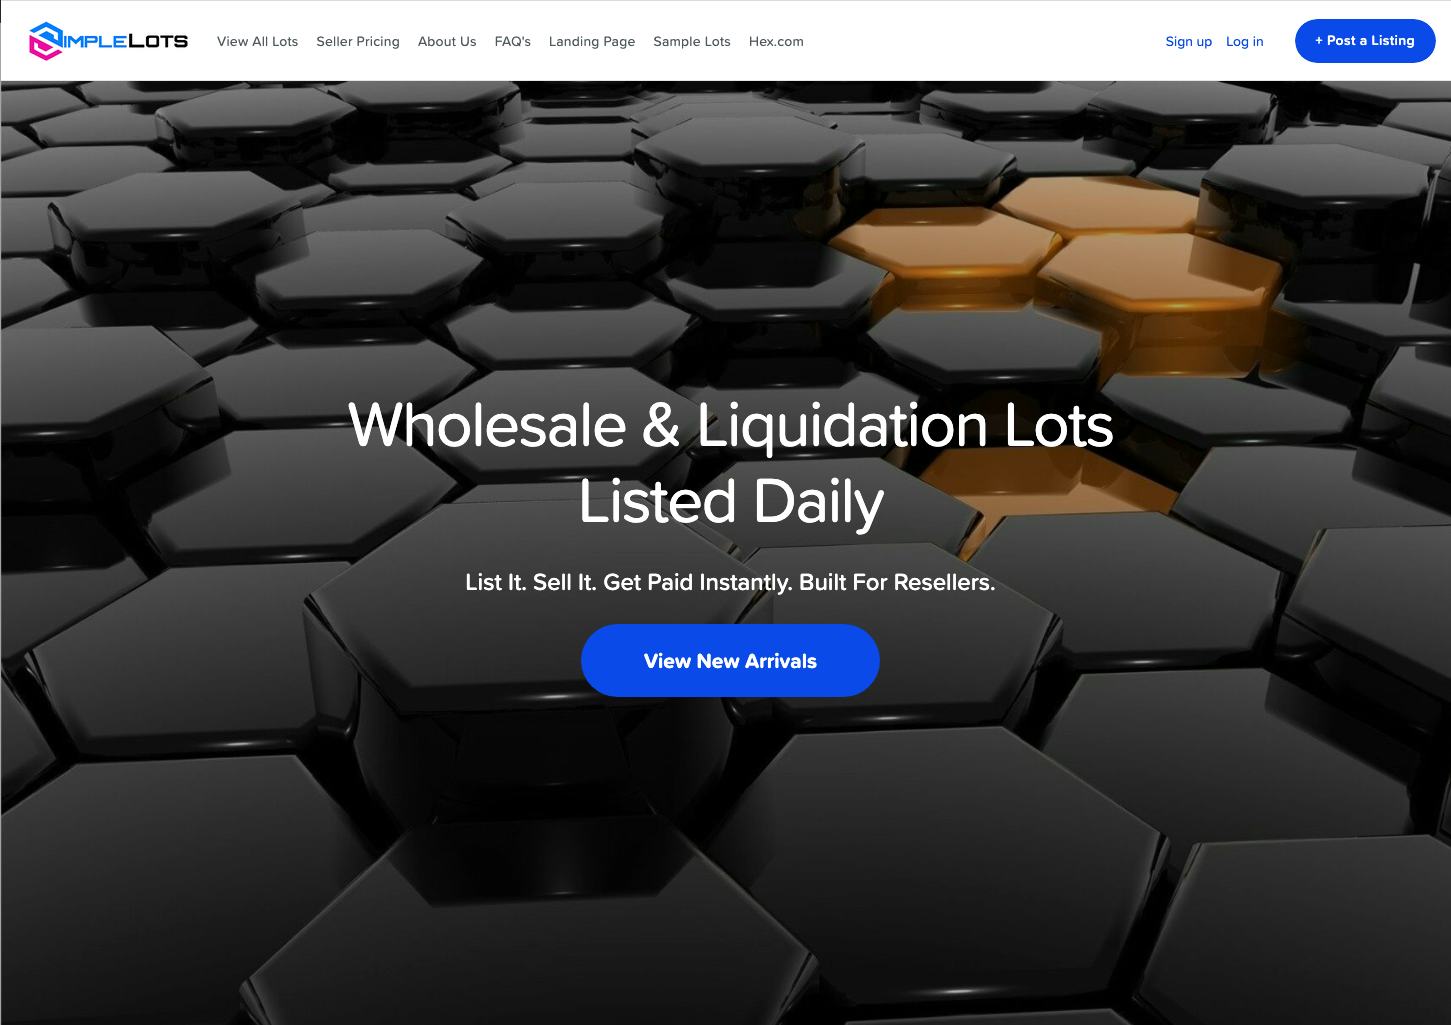 Screenshot of the Simplelots landing page that reads "Wholesale & Liquidation Lots Listed Daily".